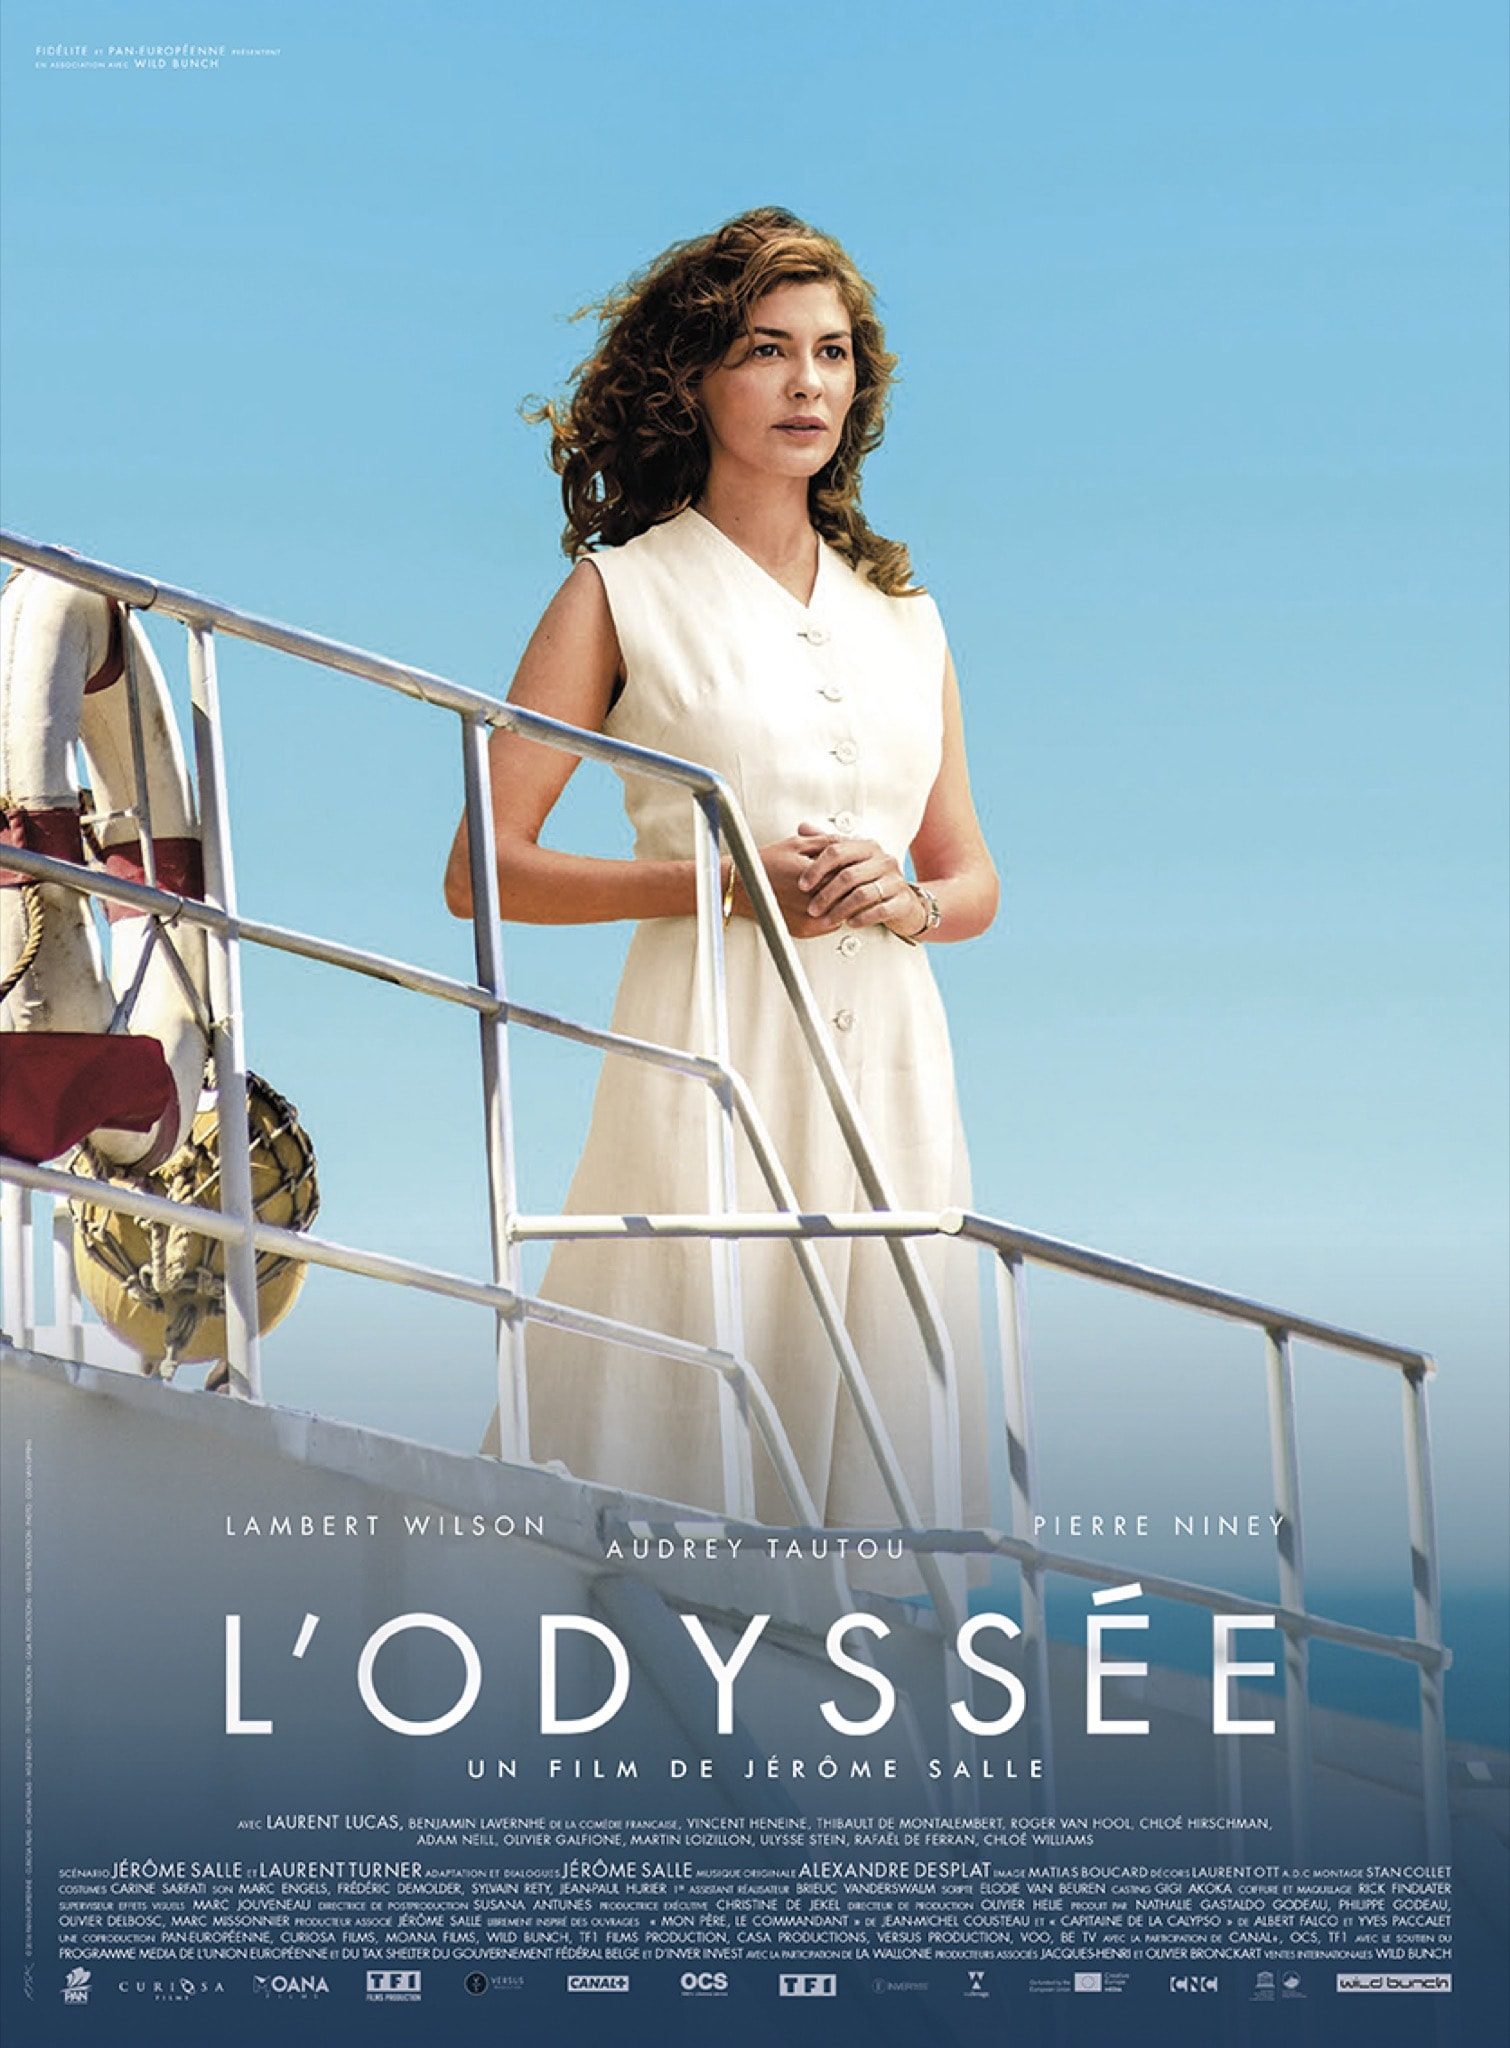 lodyssee-affiche-personnage-audrey-tautou